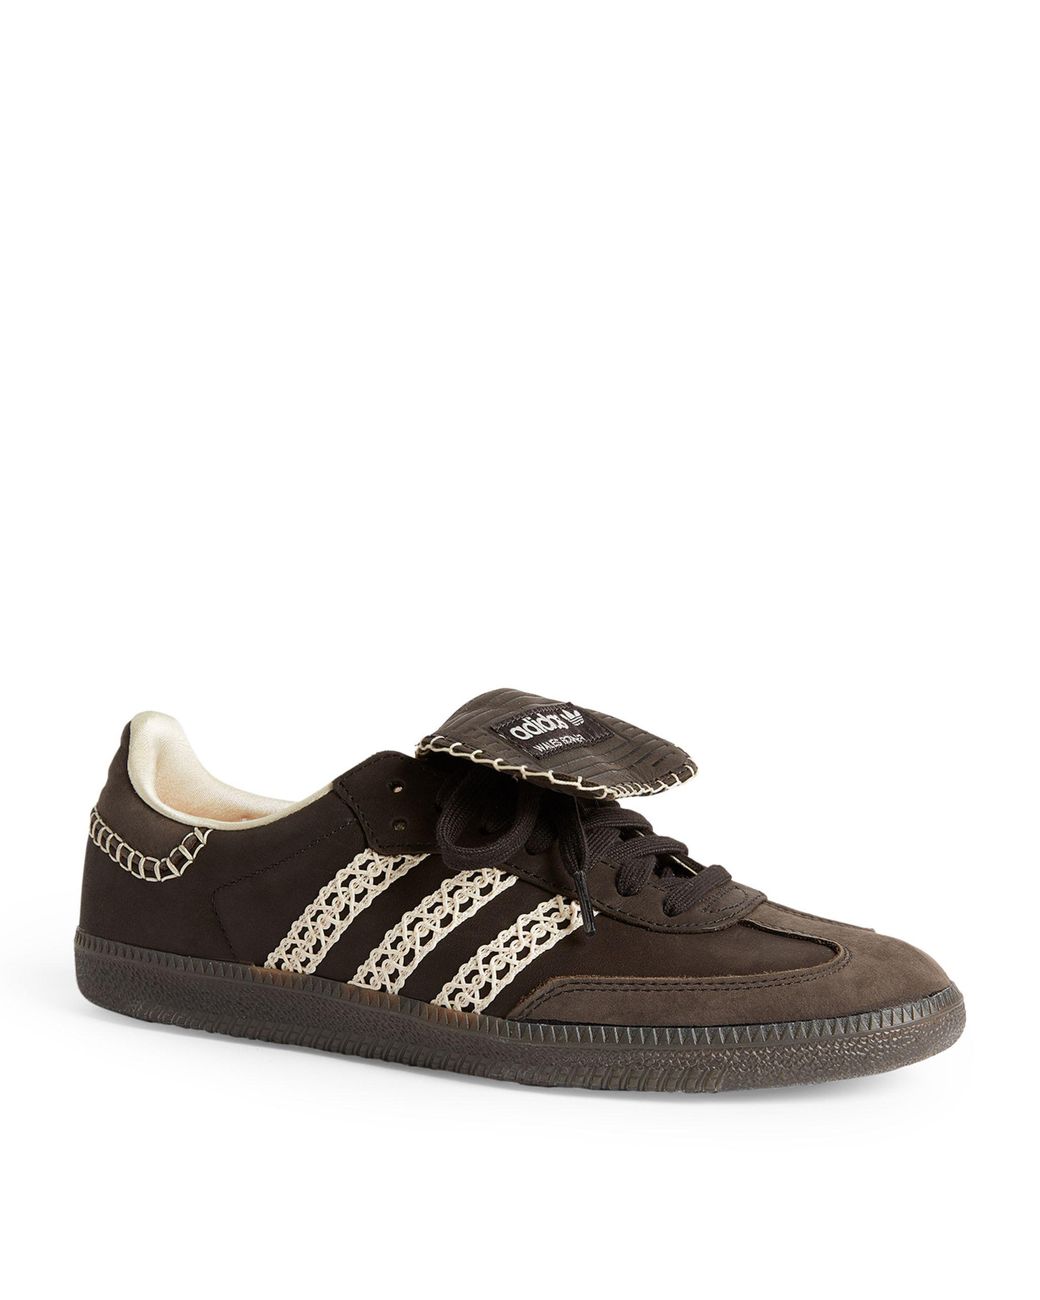 adidas Leather + Wales Bonner Samba Sneakers in Black for Men - Lyst